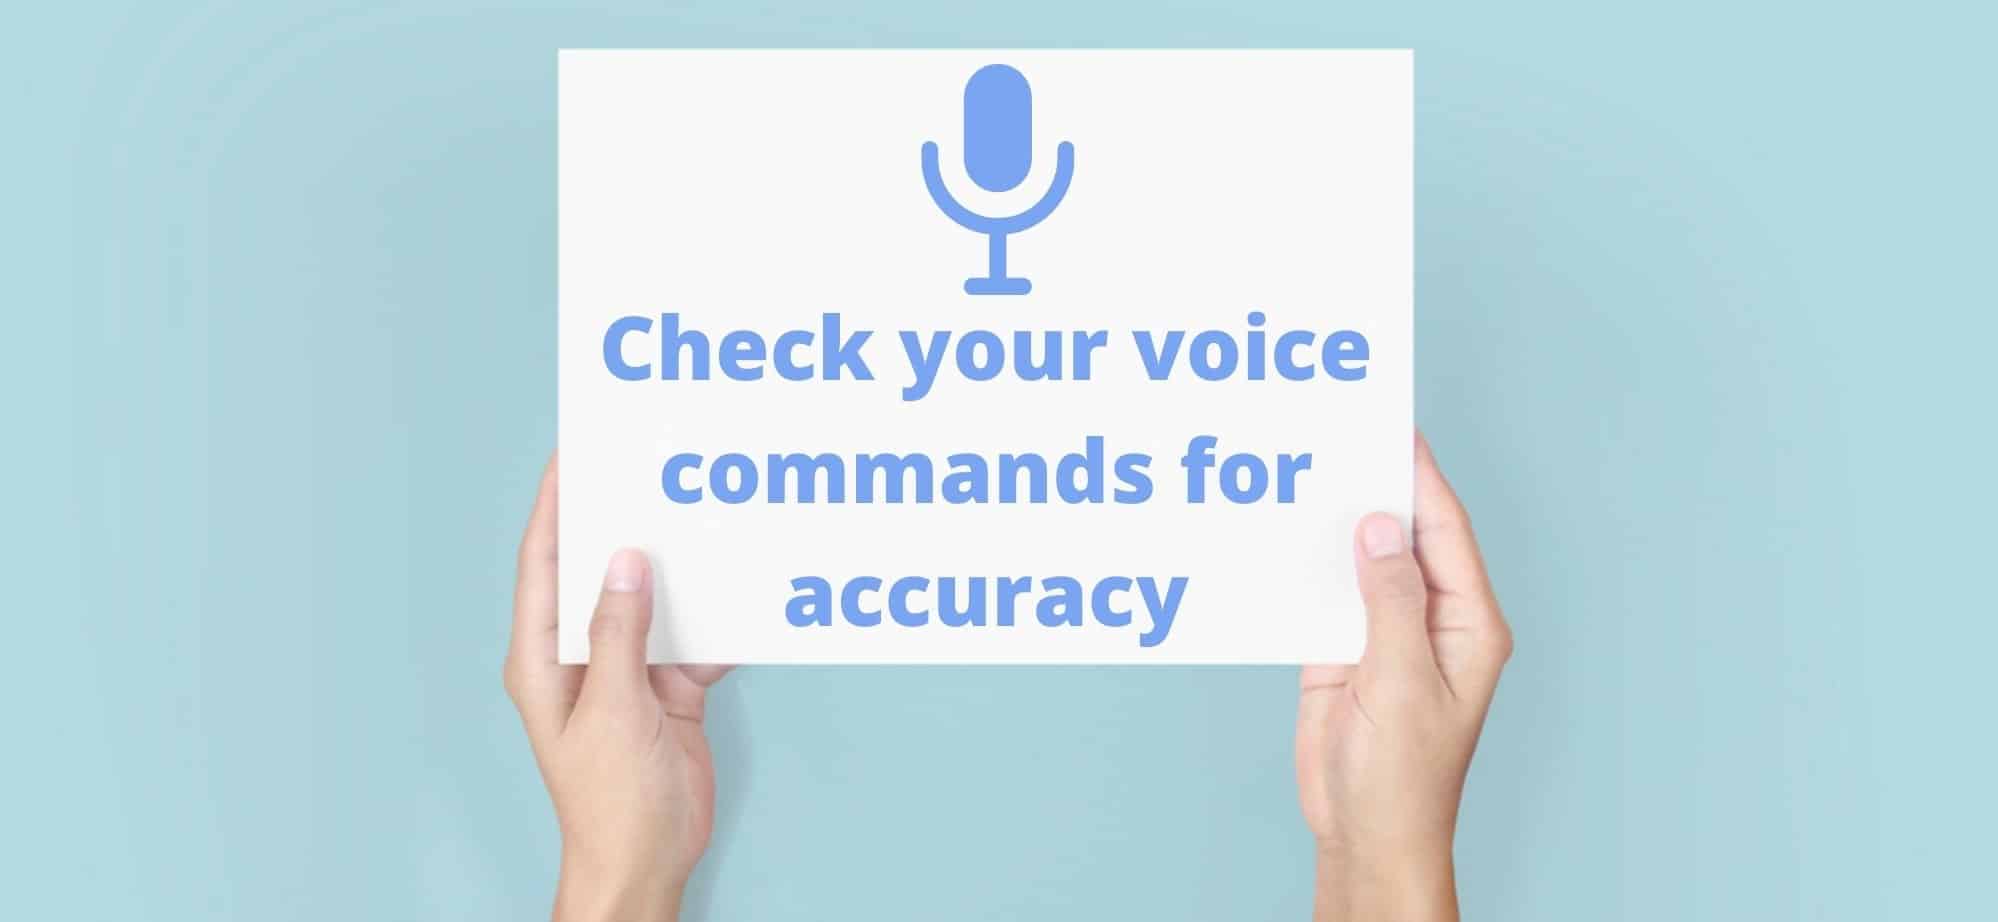 Check your voice commands for accuracy